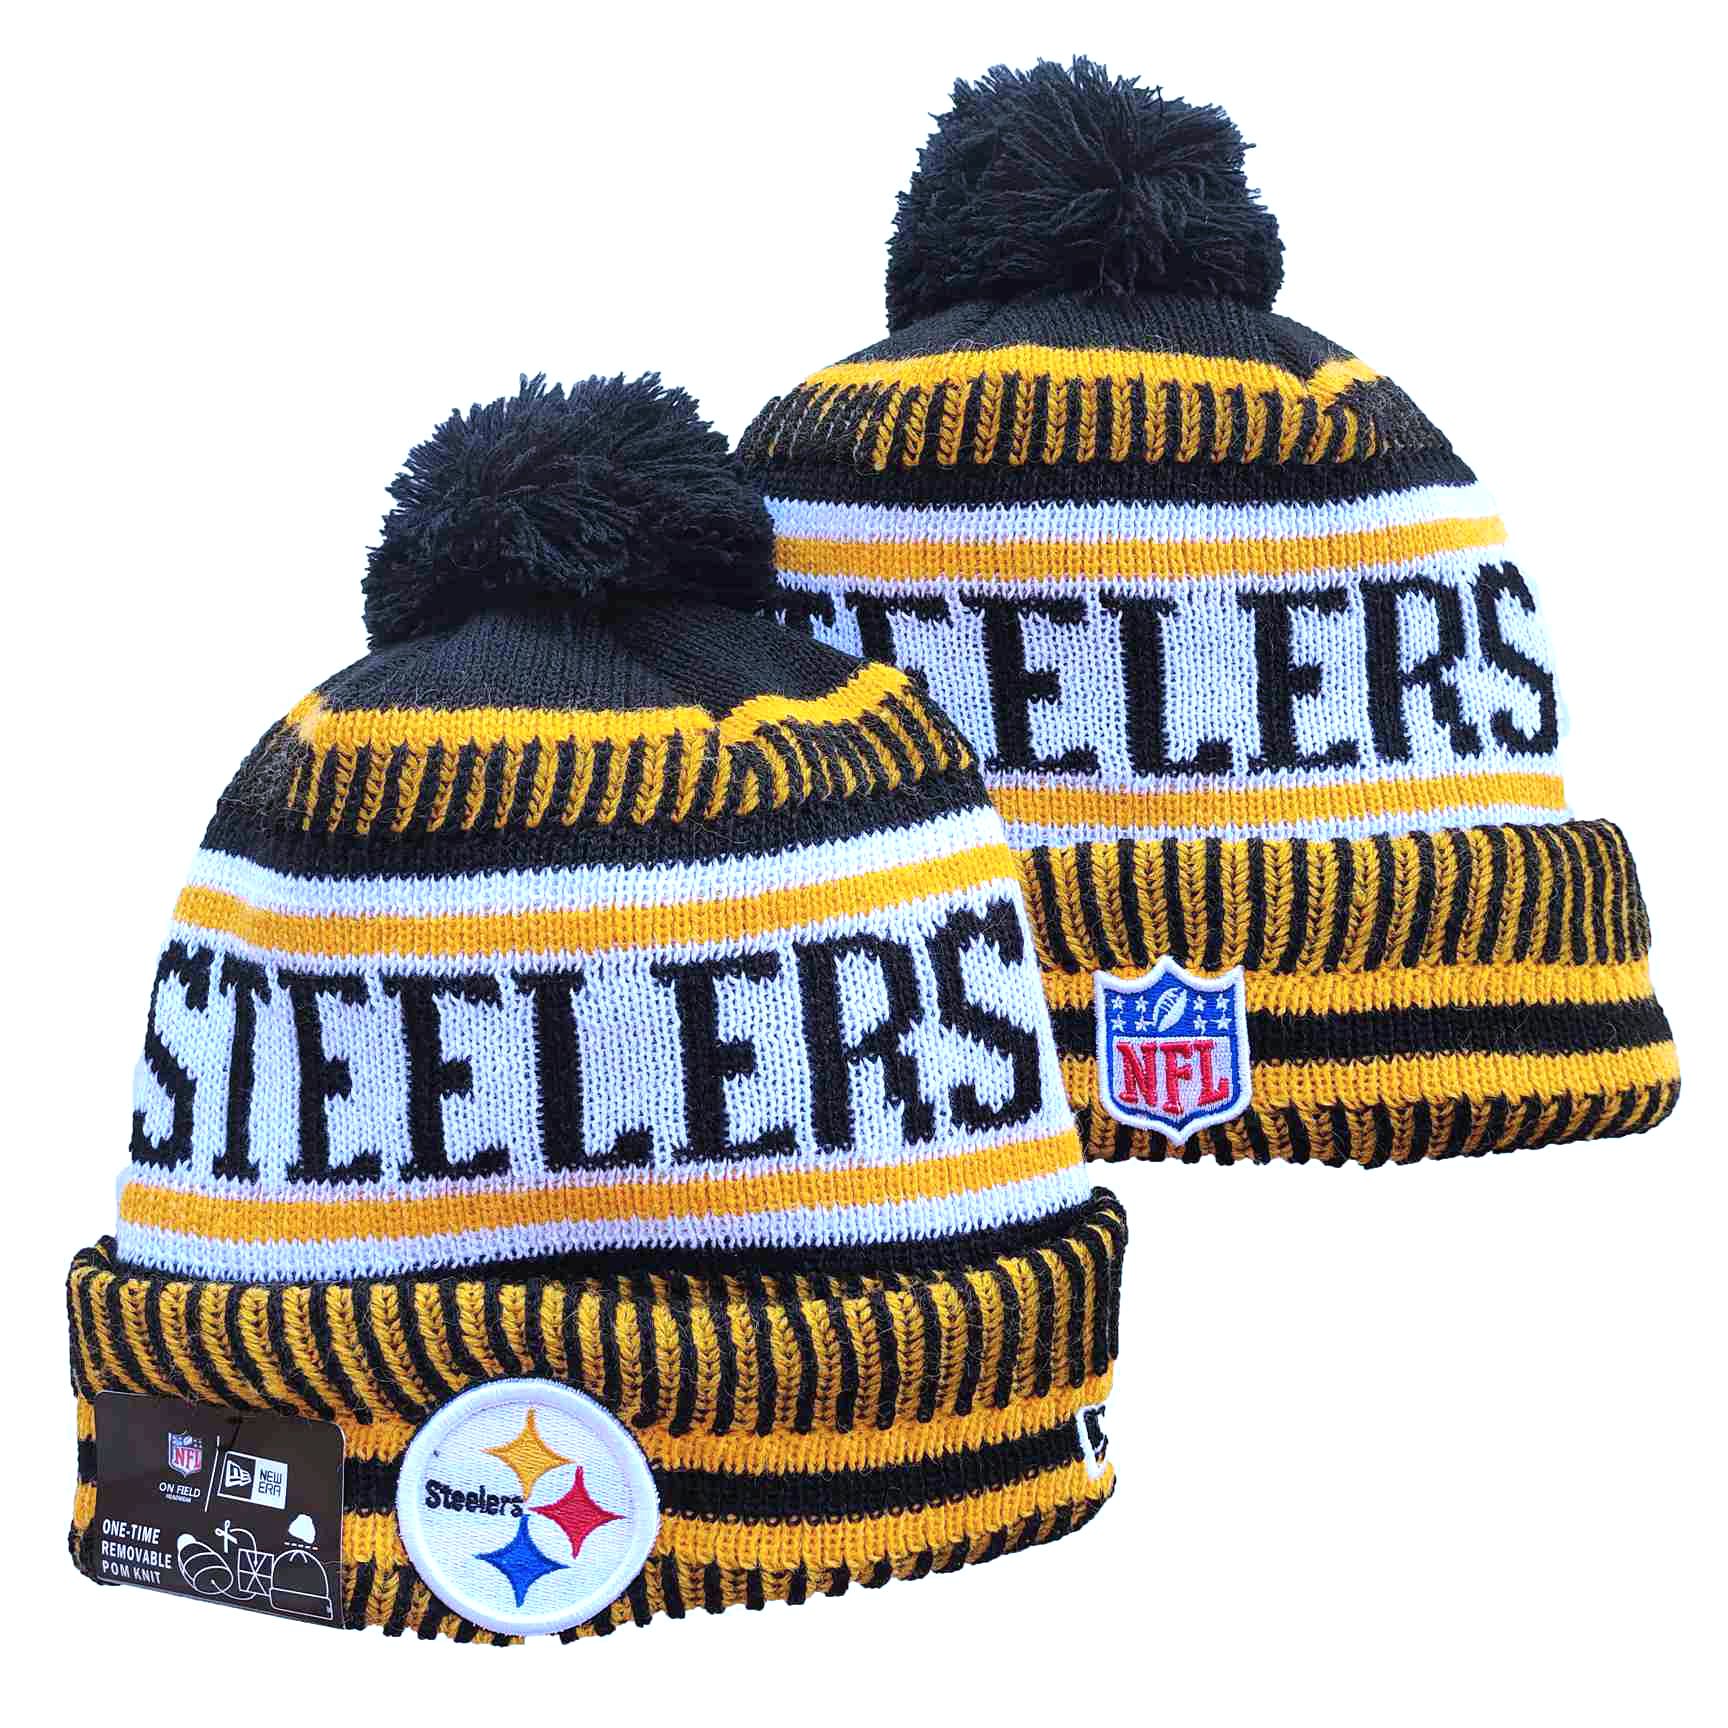 NFL Pittsburgh Steelers Beanies Knit Hats-YD1168